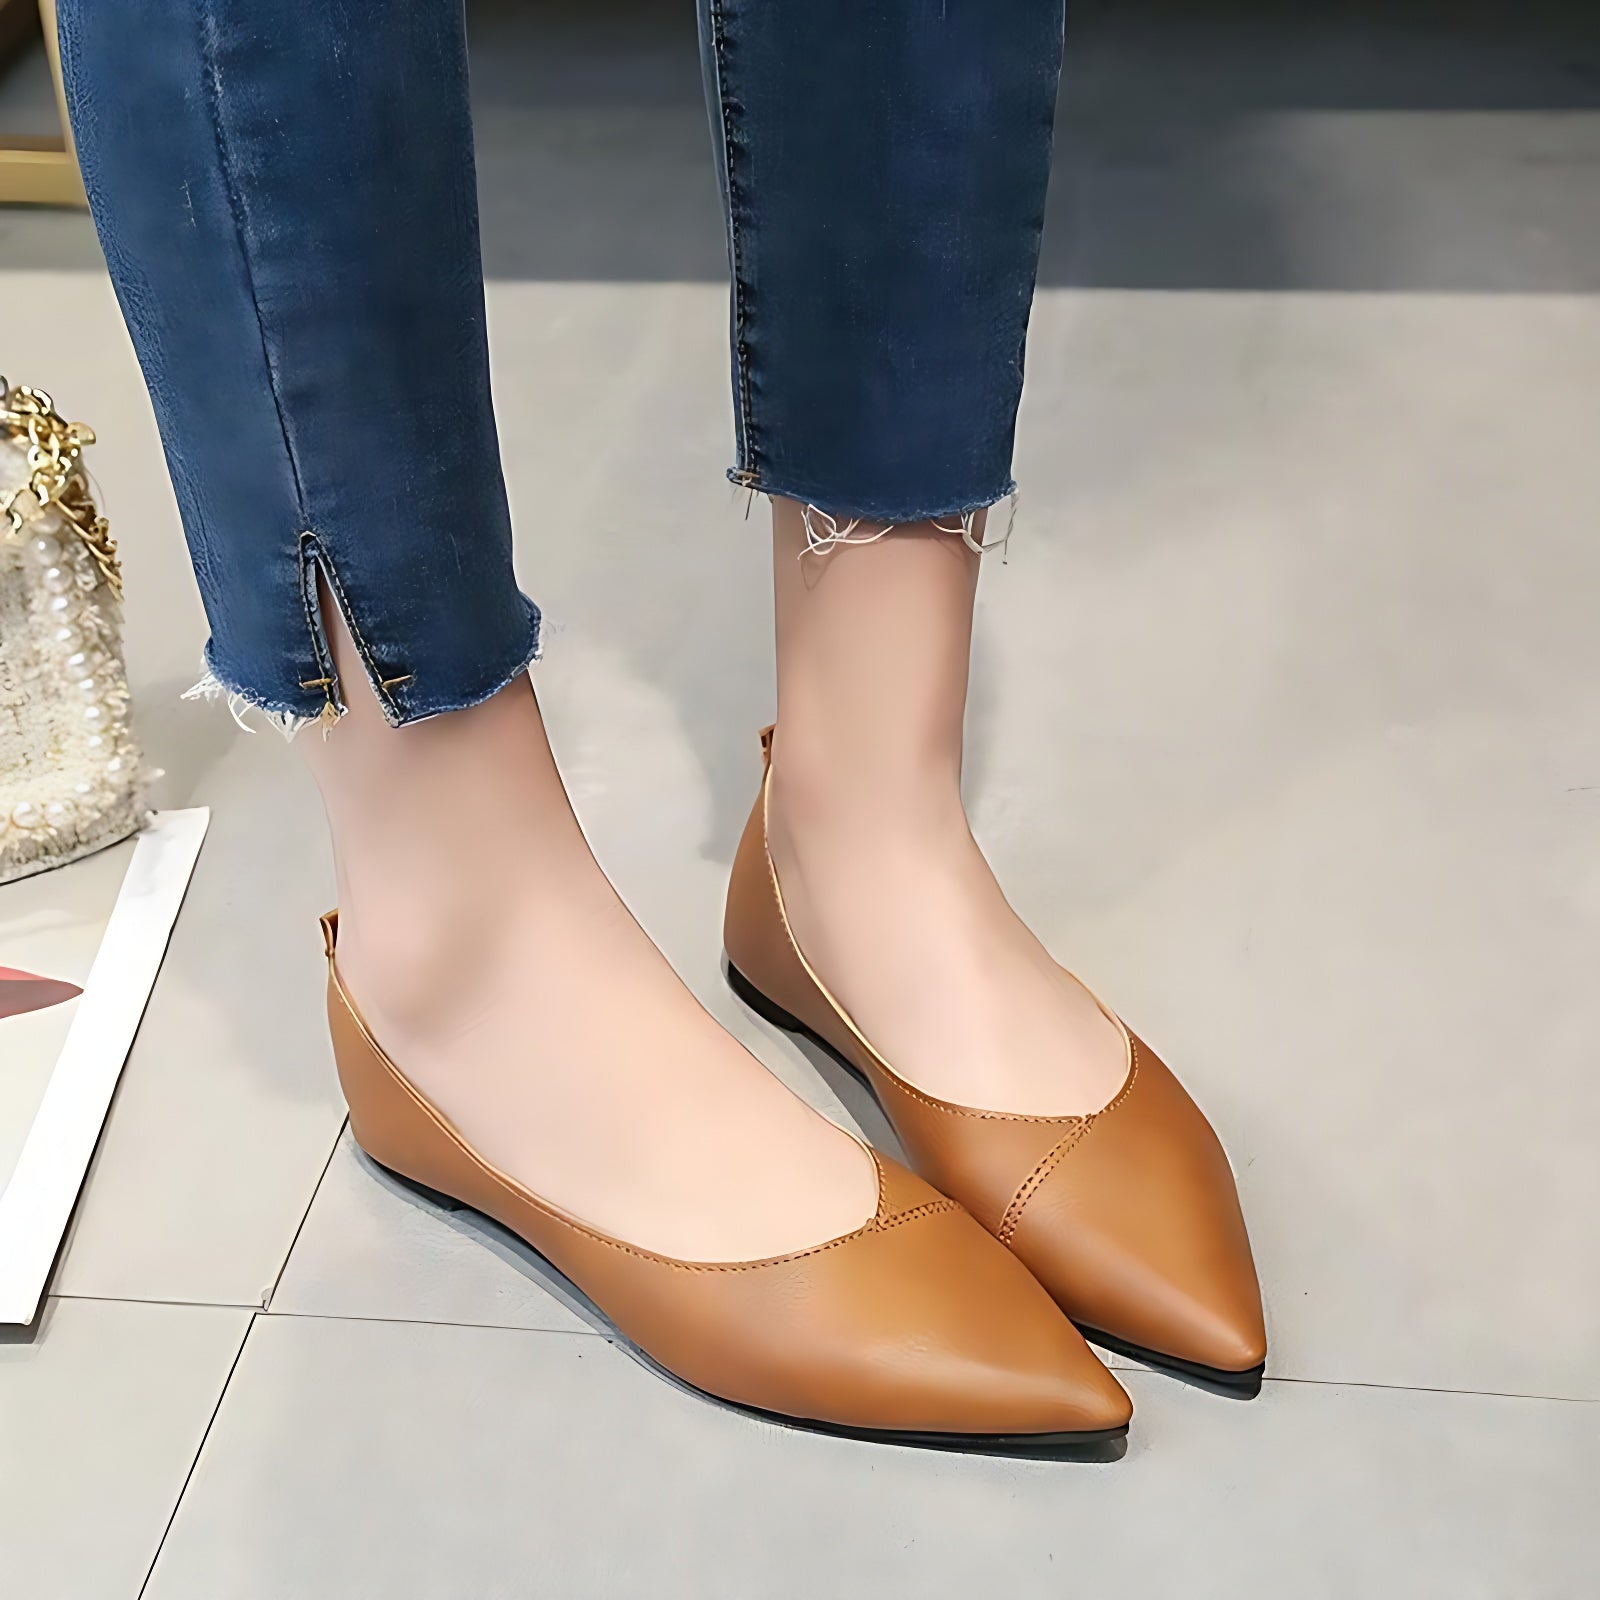 Women's Casual Shoes 2021 Soft PU Leather Ballet Flats Pointed Toe